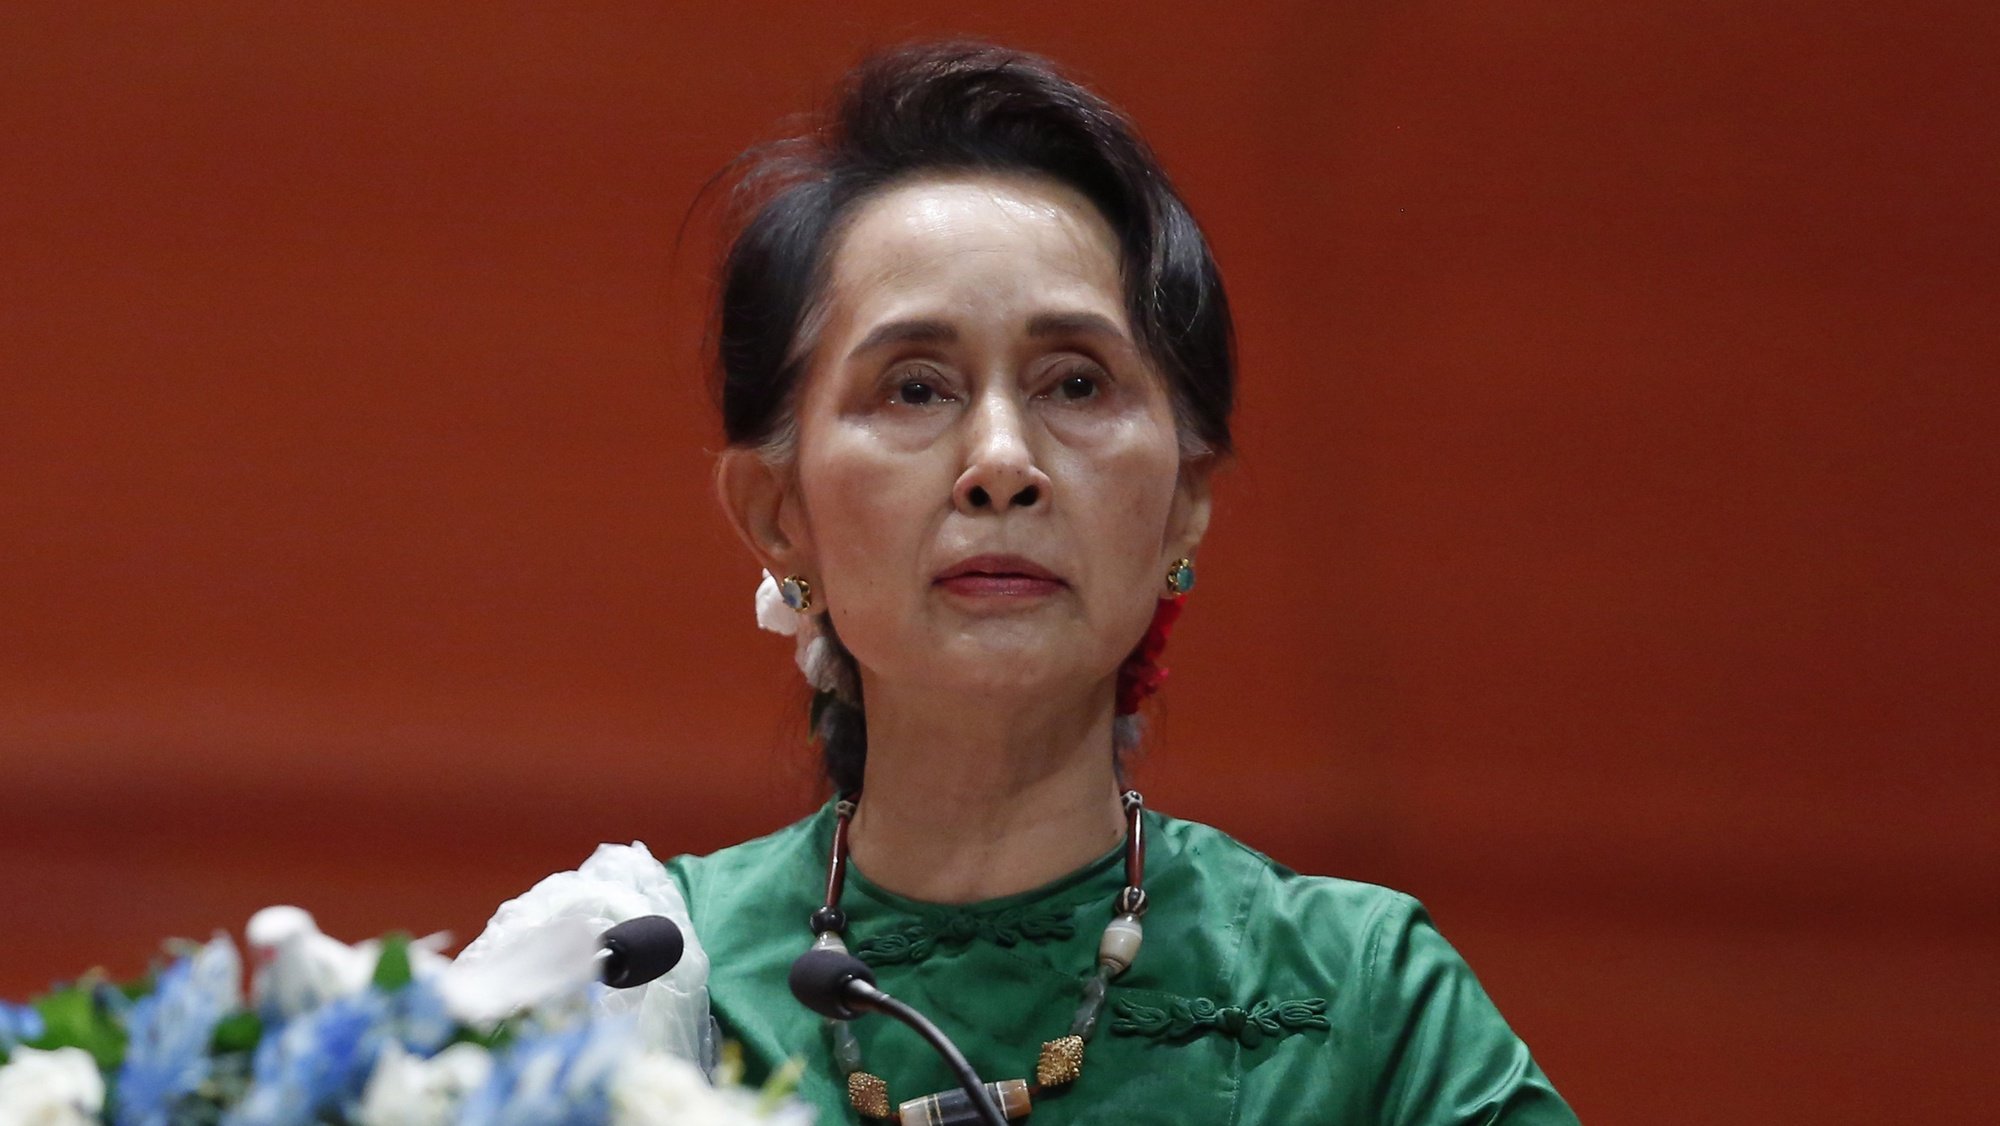 epa09911409 (FILE) - Myanmar&#039;s State Counselor Aung San Suu Kyi speaks during the closing ceremony of the third session of the &#039;Union Peace Conference - 21st century Panglong&#039; in Naypyitaw, Myanmar, 16 July 2018 (reissued 27 April 2022). On 27 April 2022, Suu Kyi was found guilty of corruption and sentenced to five years in prison under section 55 of the Anti-corruption Law.  EPA/HEIN HTET